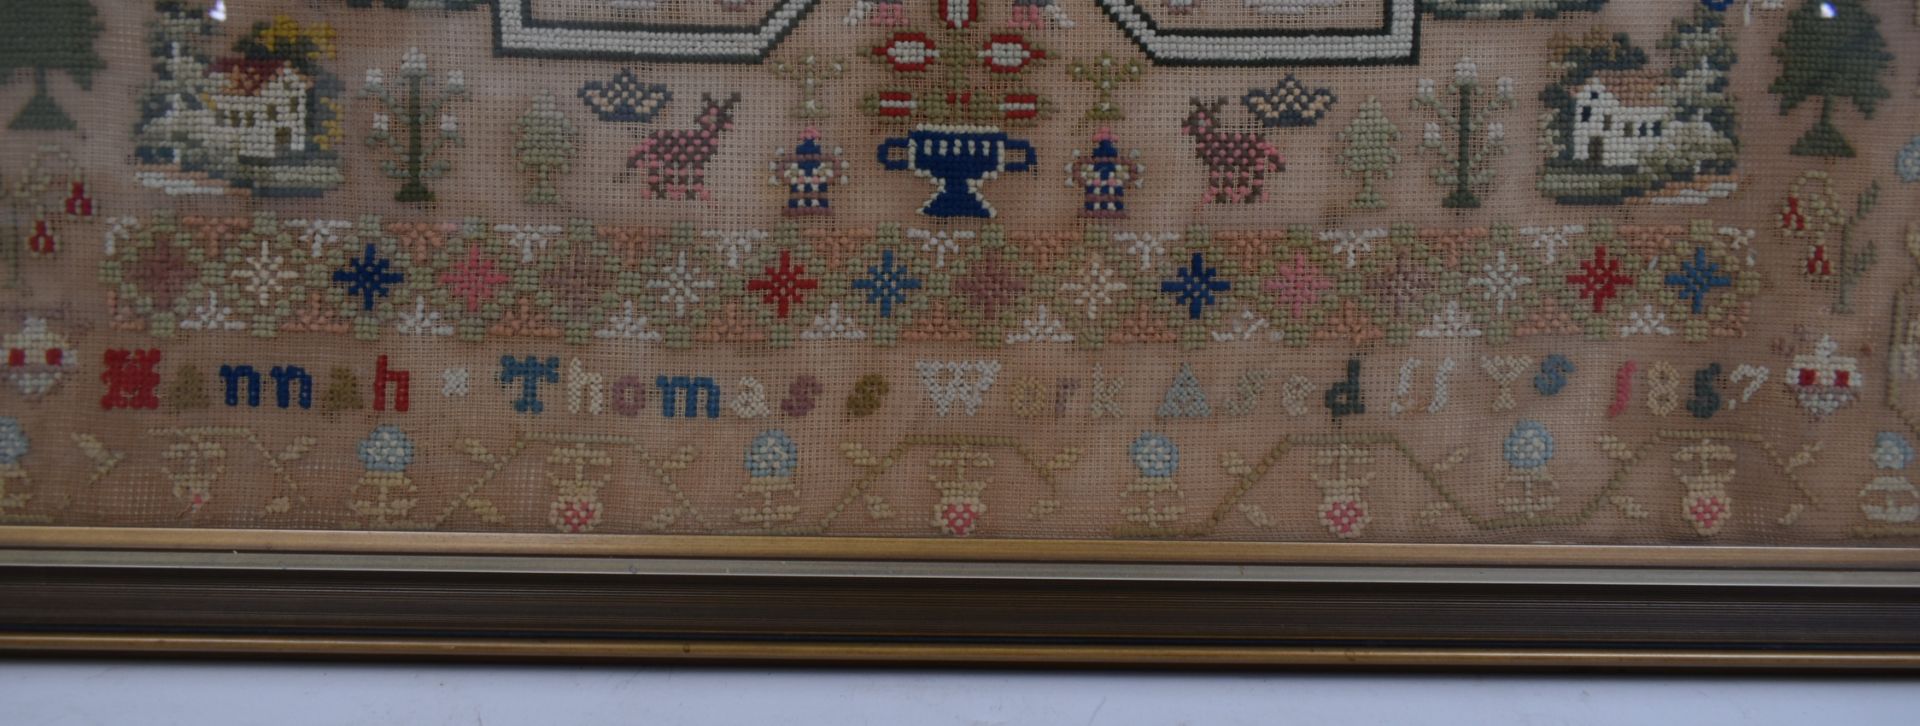 VICTORIAN 1857 NEEDLEPOINT SAMPLER BY HANNAH THOMAS AGED 11 - Image 3 of 4